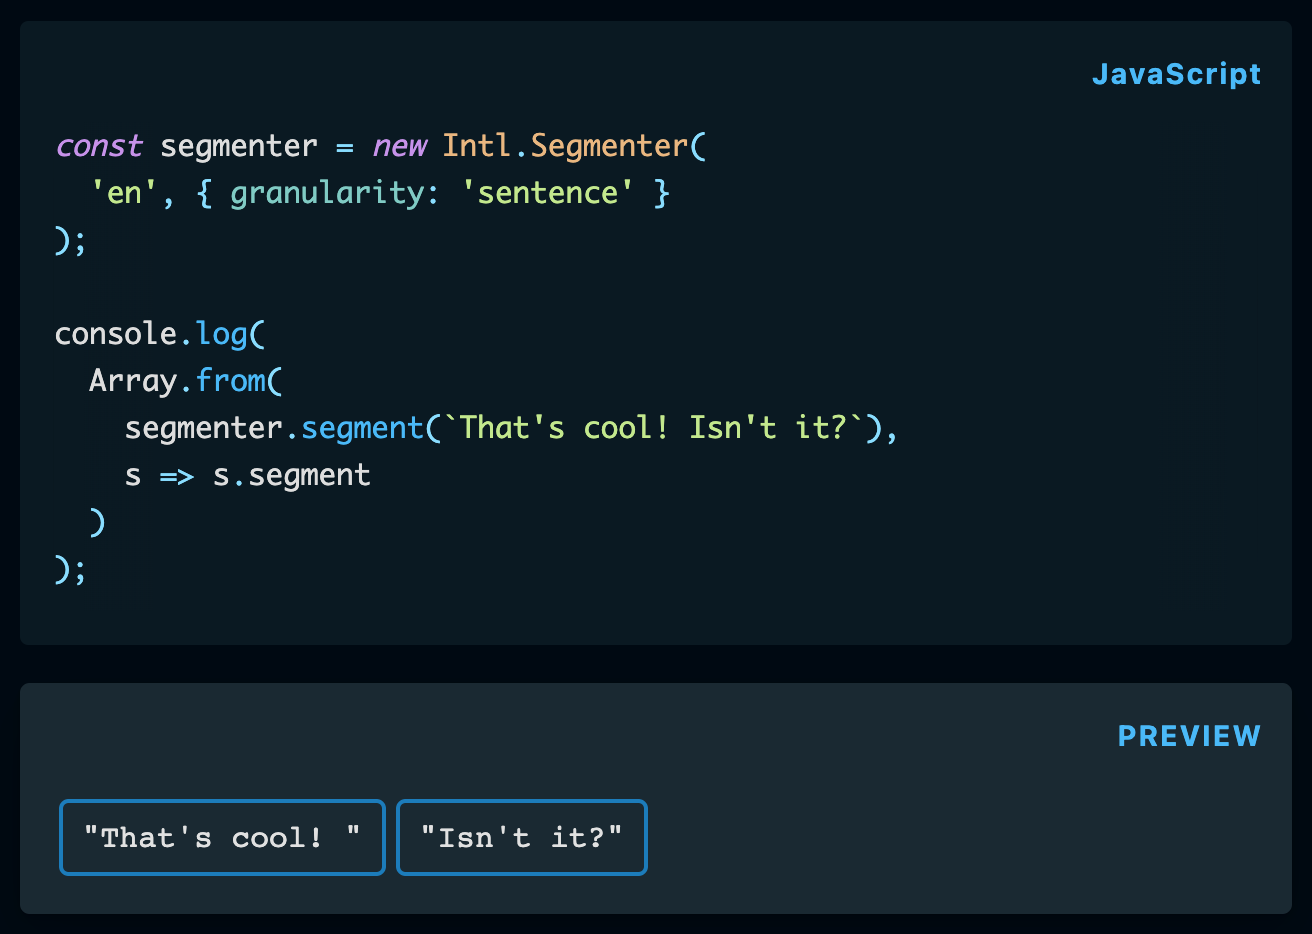 JavaScript code showing how to use "Intl.Segmenter"